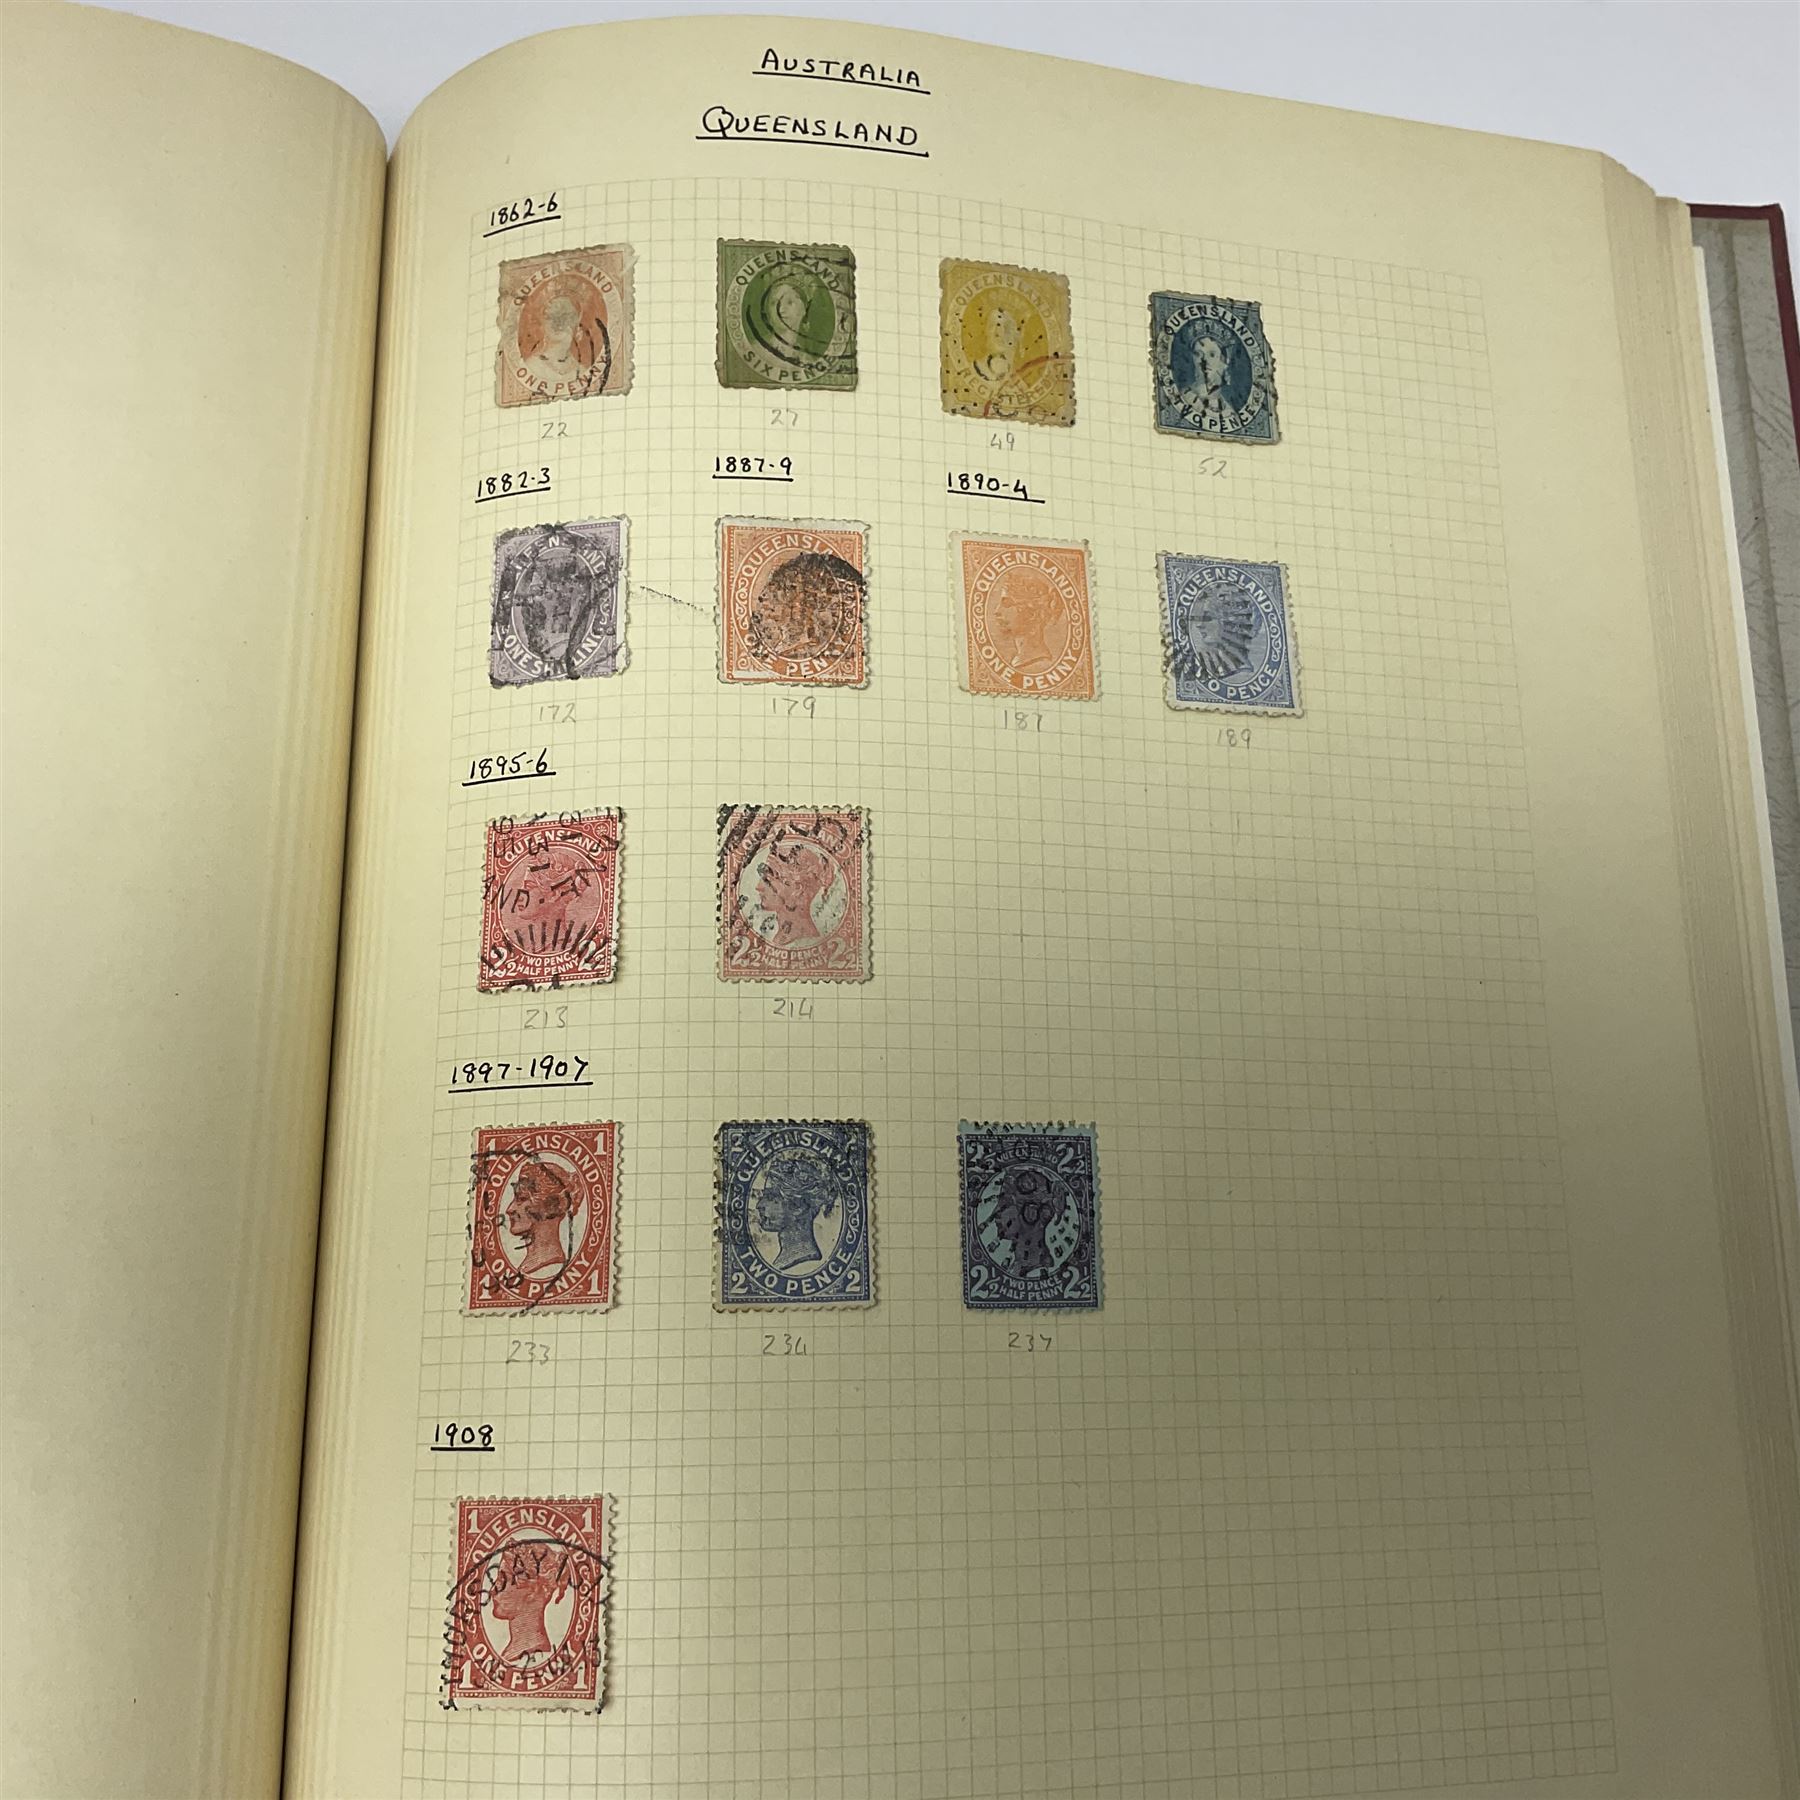 Queen Victoria and later Great British and World stamps - Image 19 of 25